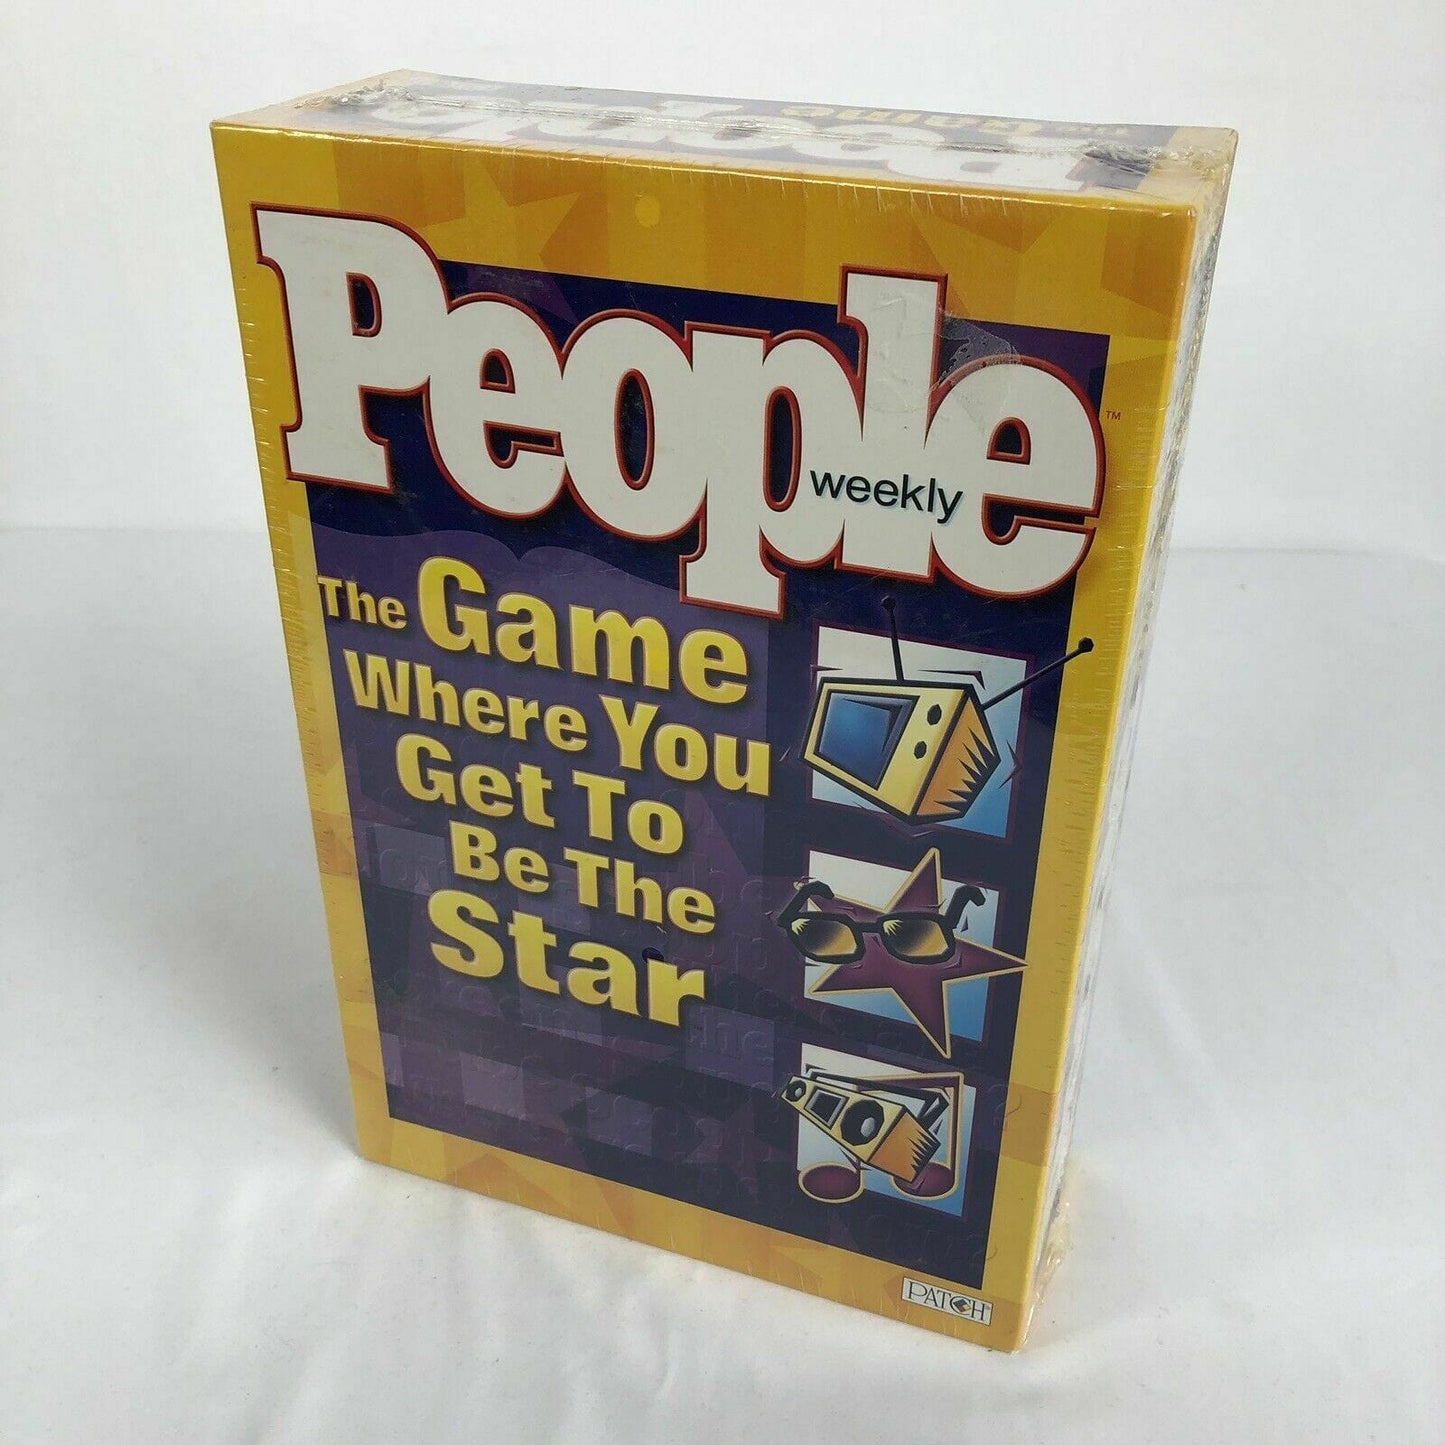 People Weekly Board Game by Patch, The Game Where You Get To Be The Star NIB